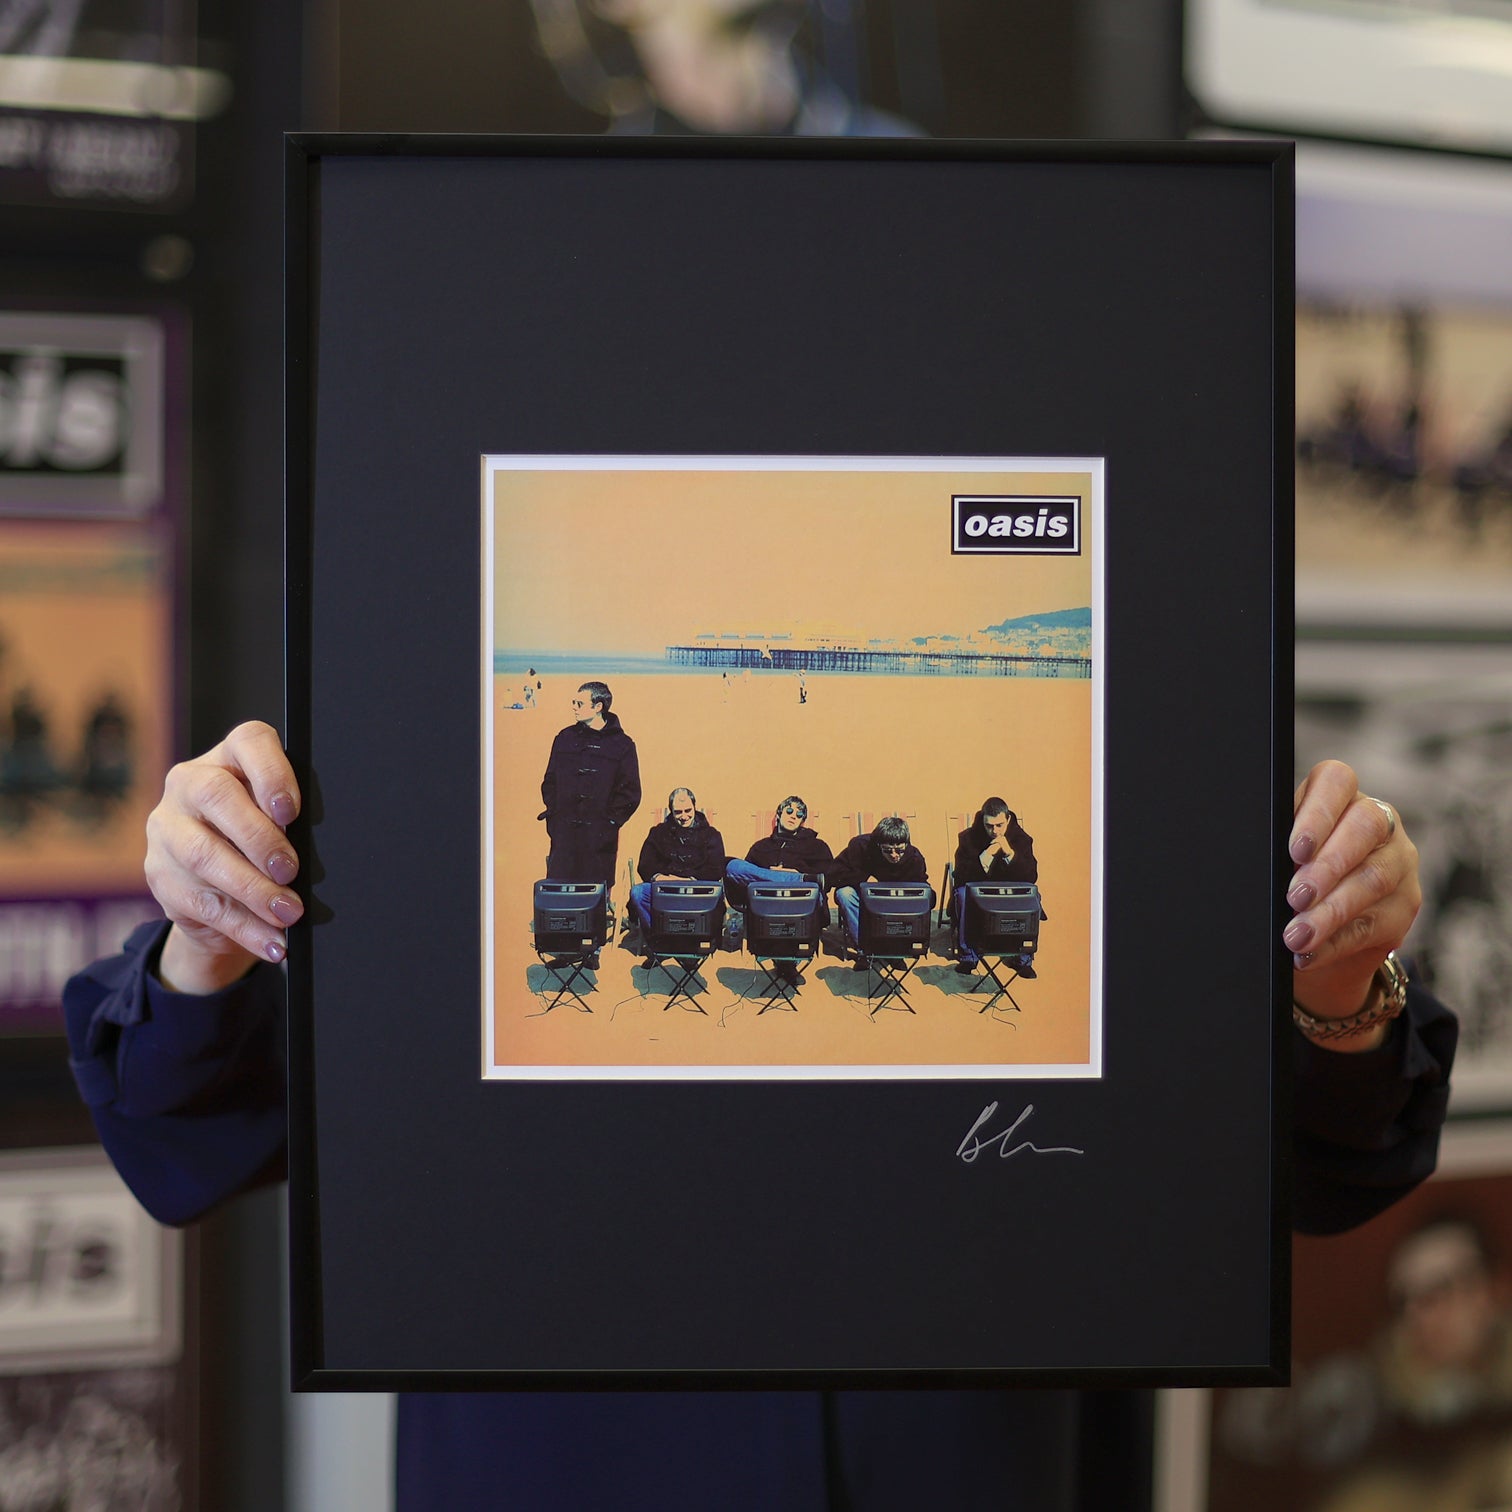 Oasis - Roll With It - Framed Printers Proof - New Item